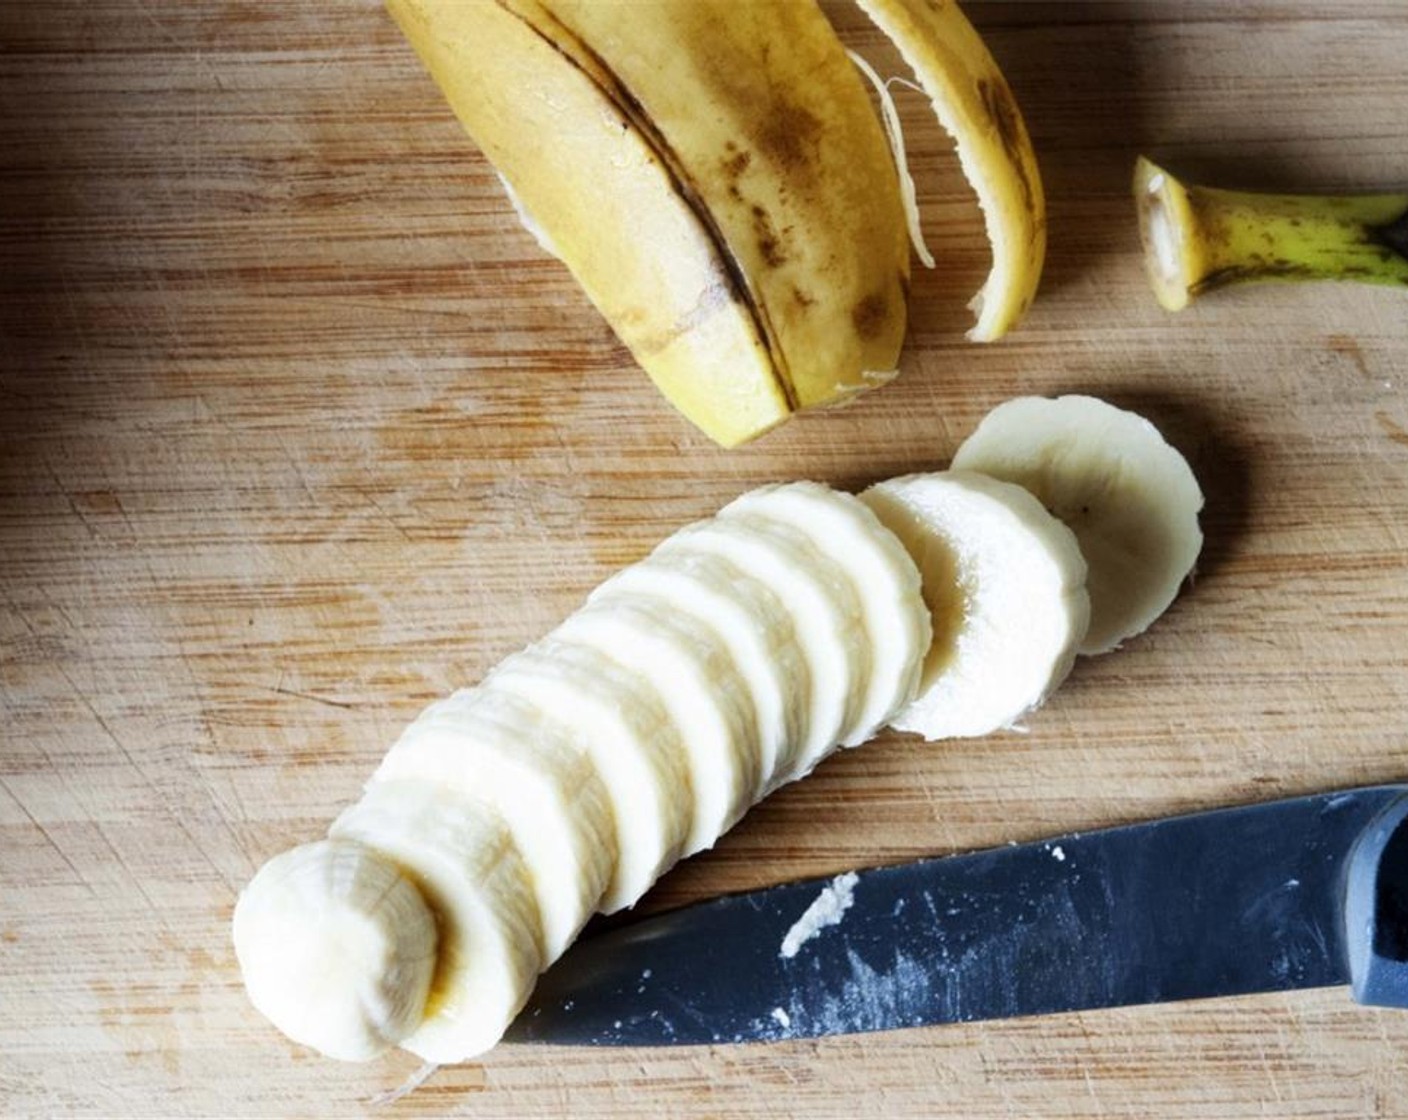 step 1 Melt the Unsalted Butter (1/4 cup) then let it cool. Peel and slice up half of the ripe Bananas (2).